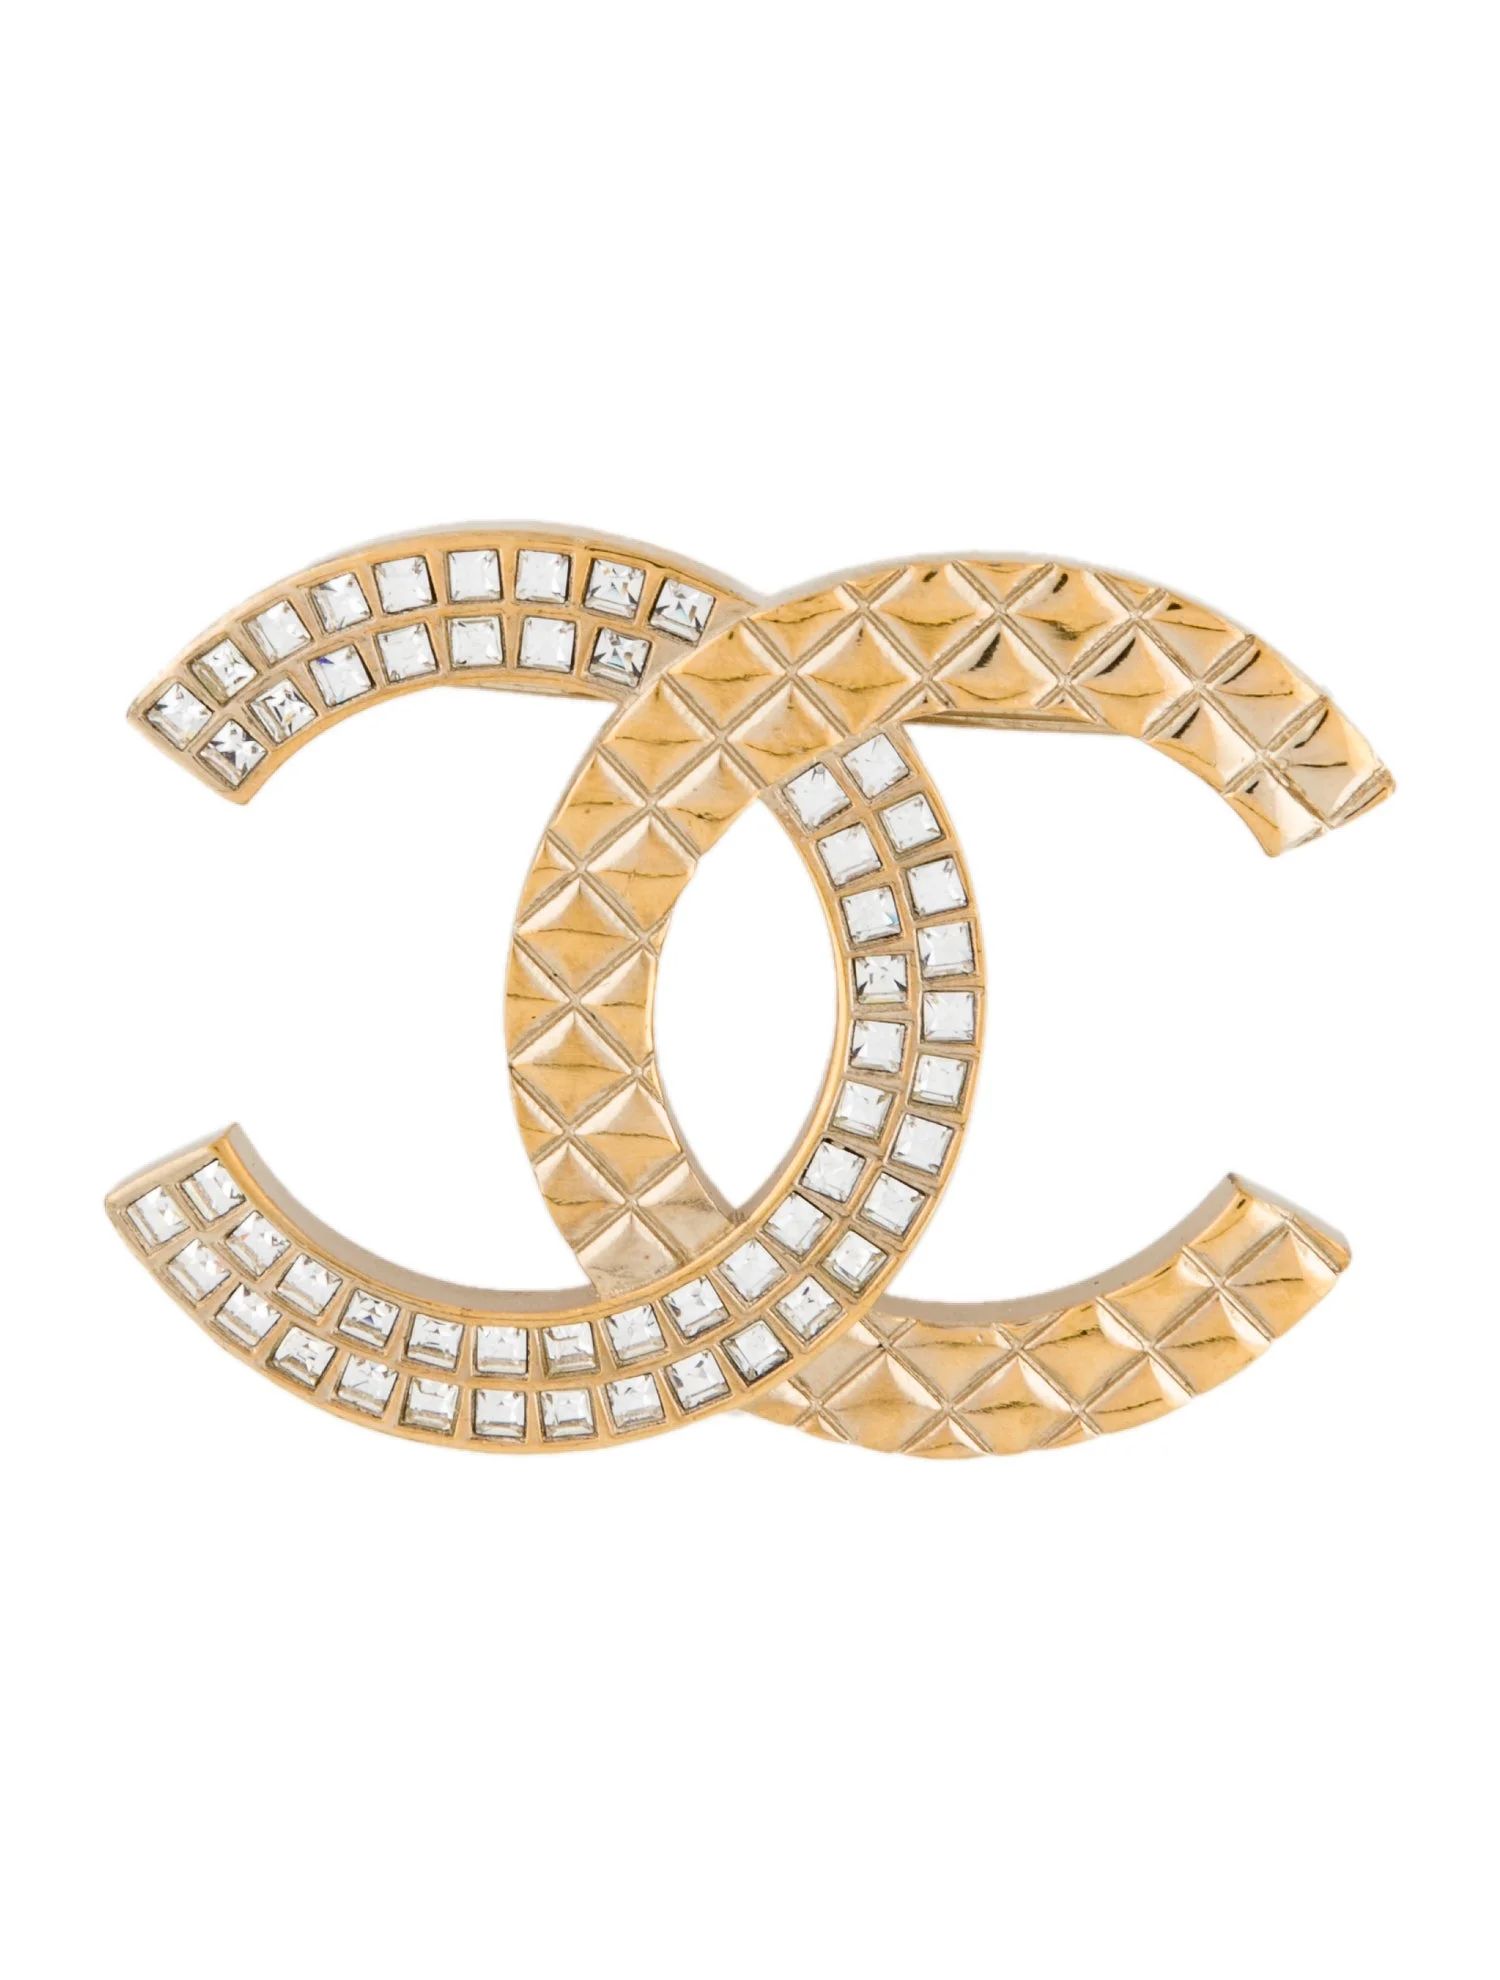 Strass CC Brooch | The RealReal